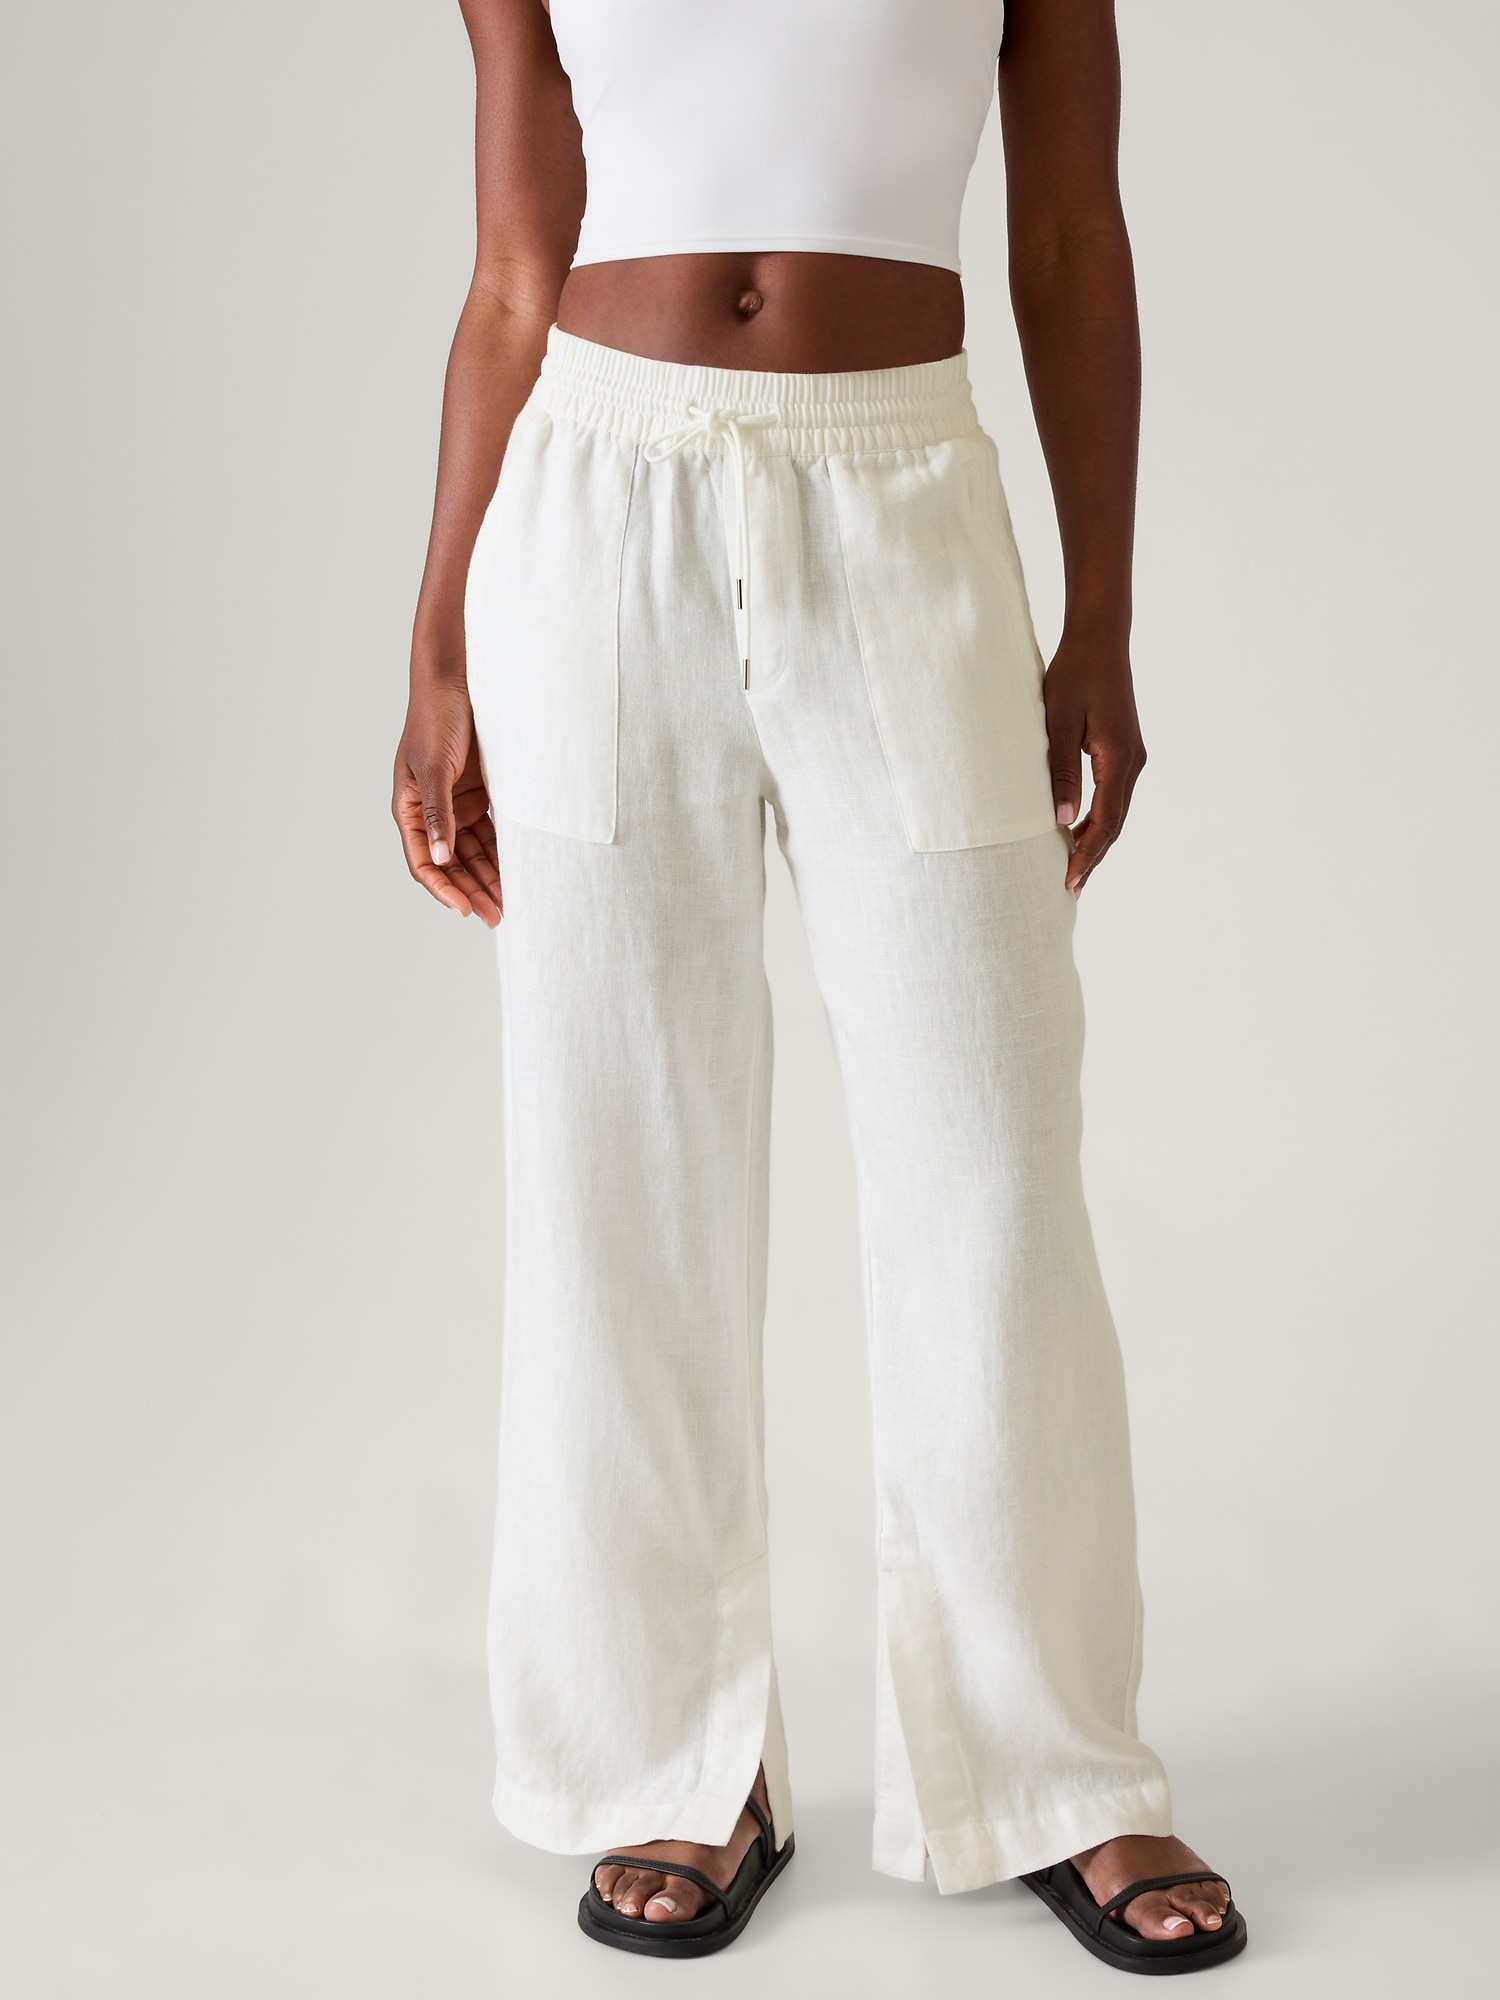 Athleta Linen Pants Blue Size 0 - $22 - From Rylie